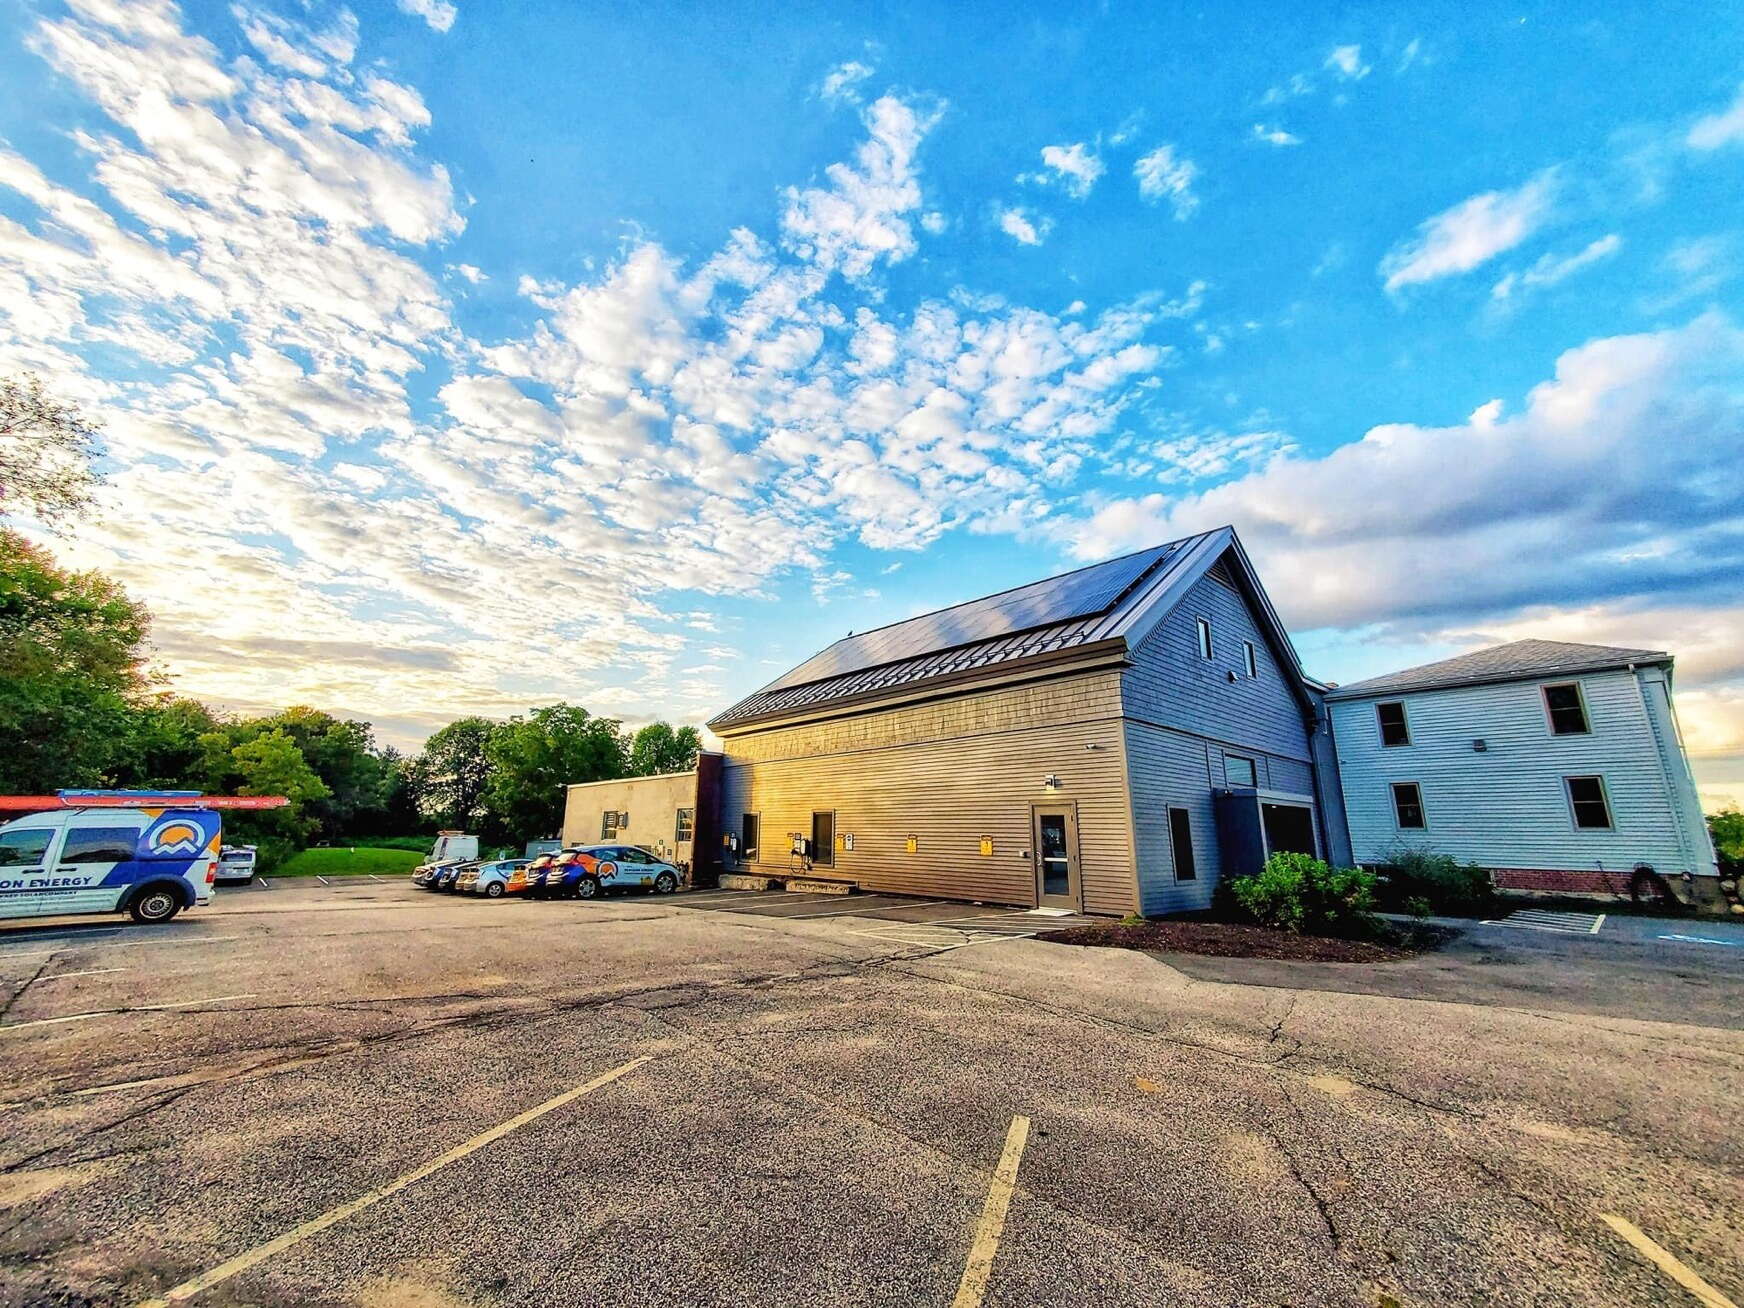 wide-angle photo of building sky and parking lot